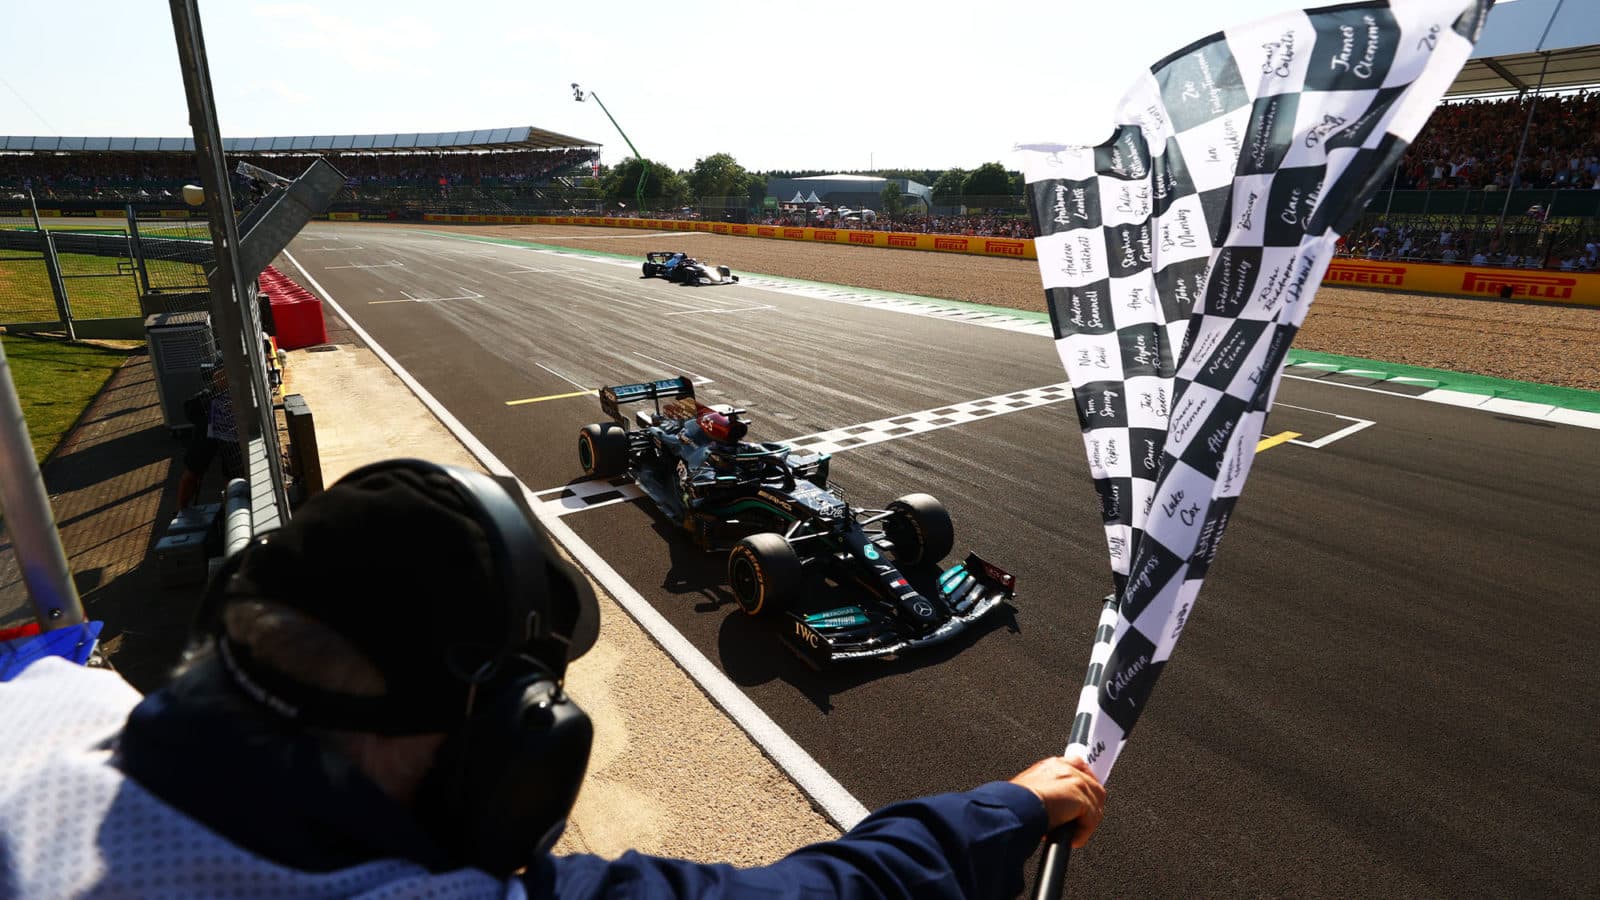 NORTHAMPTON, ENGLAND - JULY 18: Race winner Lewis Hamilton of Great Britain driving the (44) Mercedes AMG Petronas F1 Team Mercedes W12 takes the chequered flag during the F1 Grand Prix of Great Britain at Silverstone on July 18, 2021 in Northampton, England. (Photo by Dan Istitene - Formula 1/Formula 1 via Getty Images)